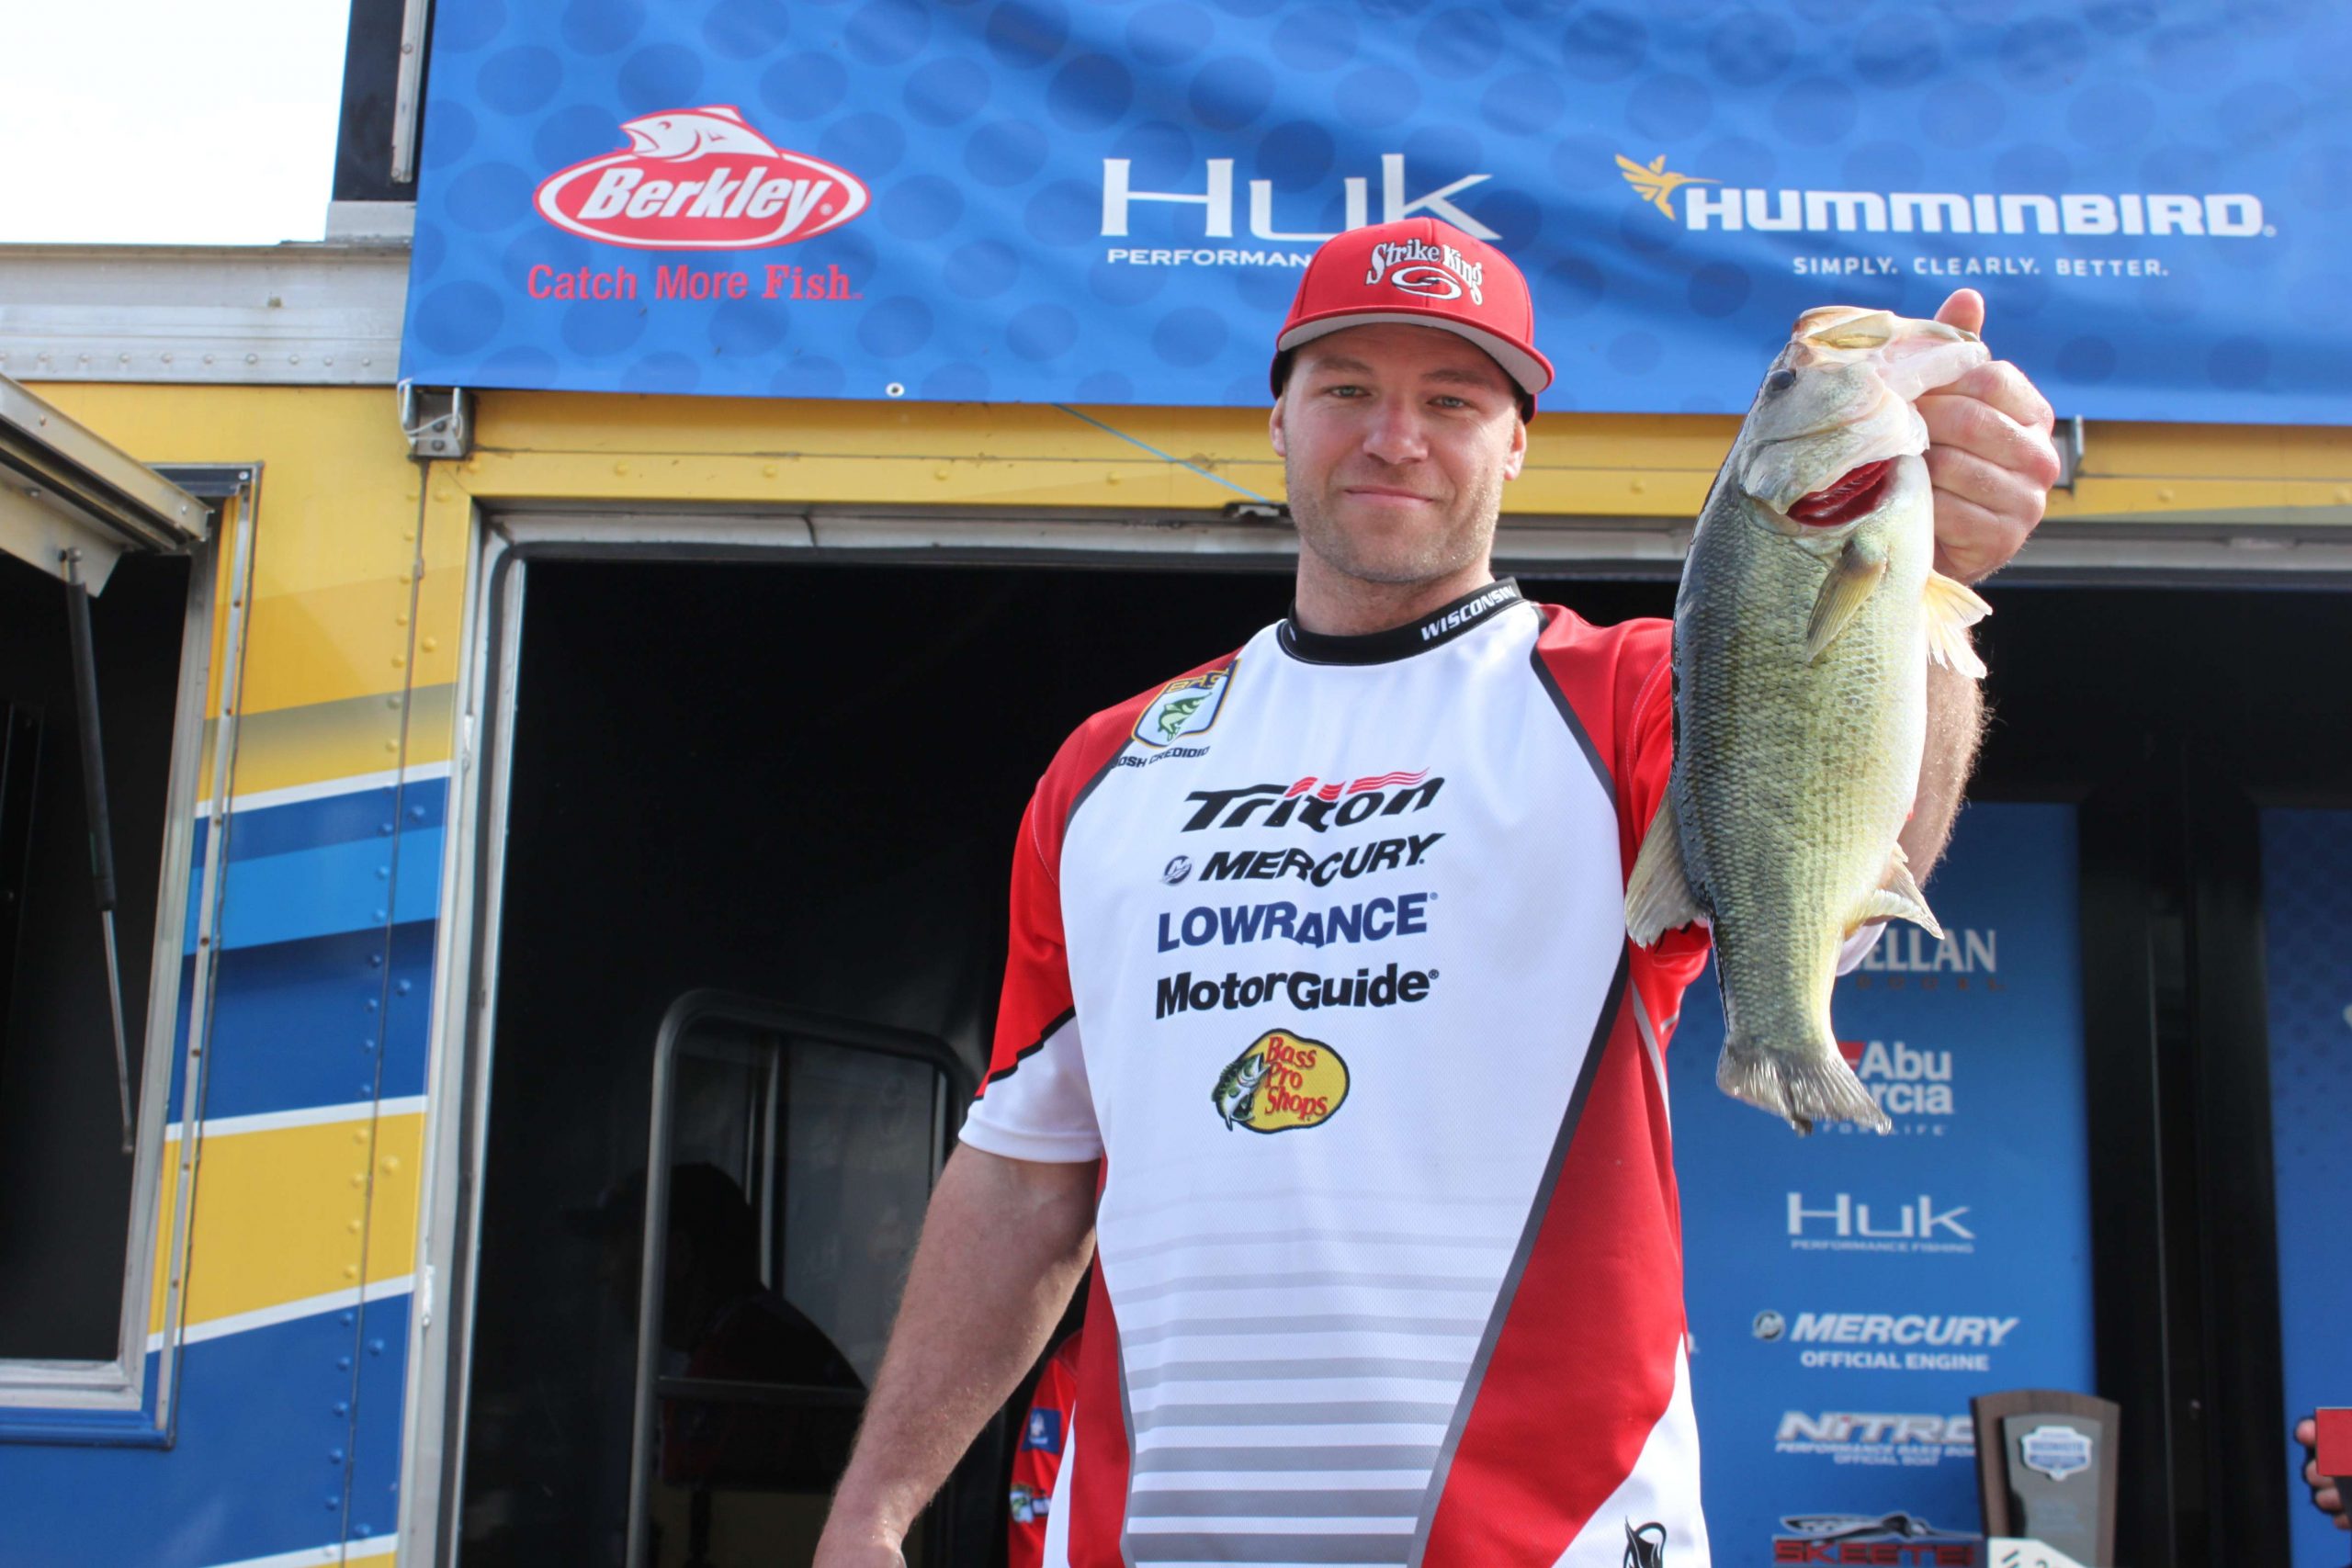 Speaking of good tournaments, thereâs Josh Crededio of Team Wisconsin. He finished second in the non-boater division with 31-11 over three days.